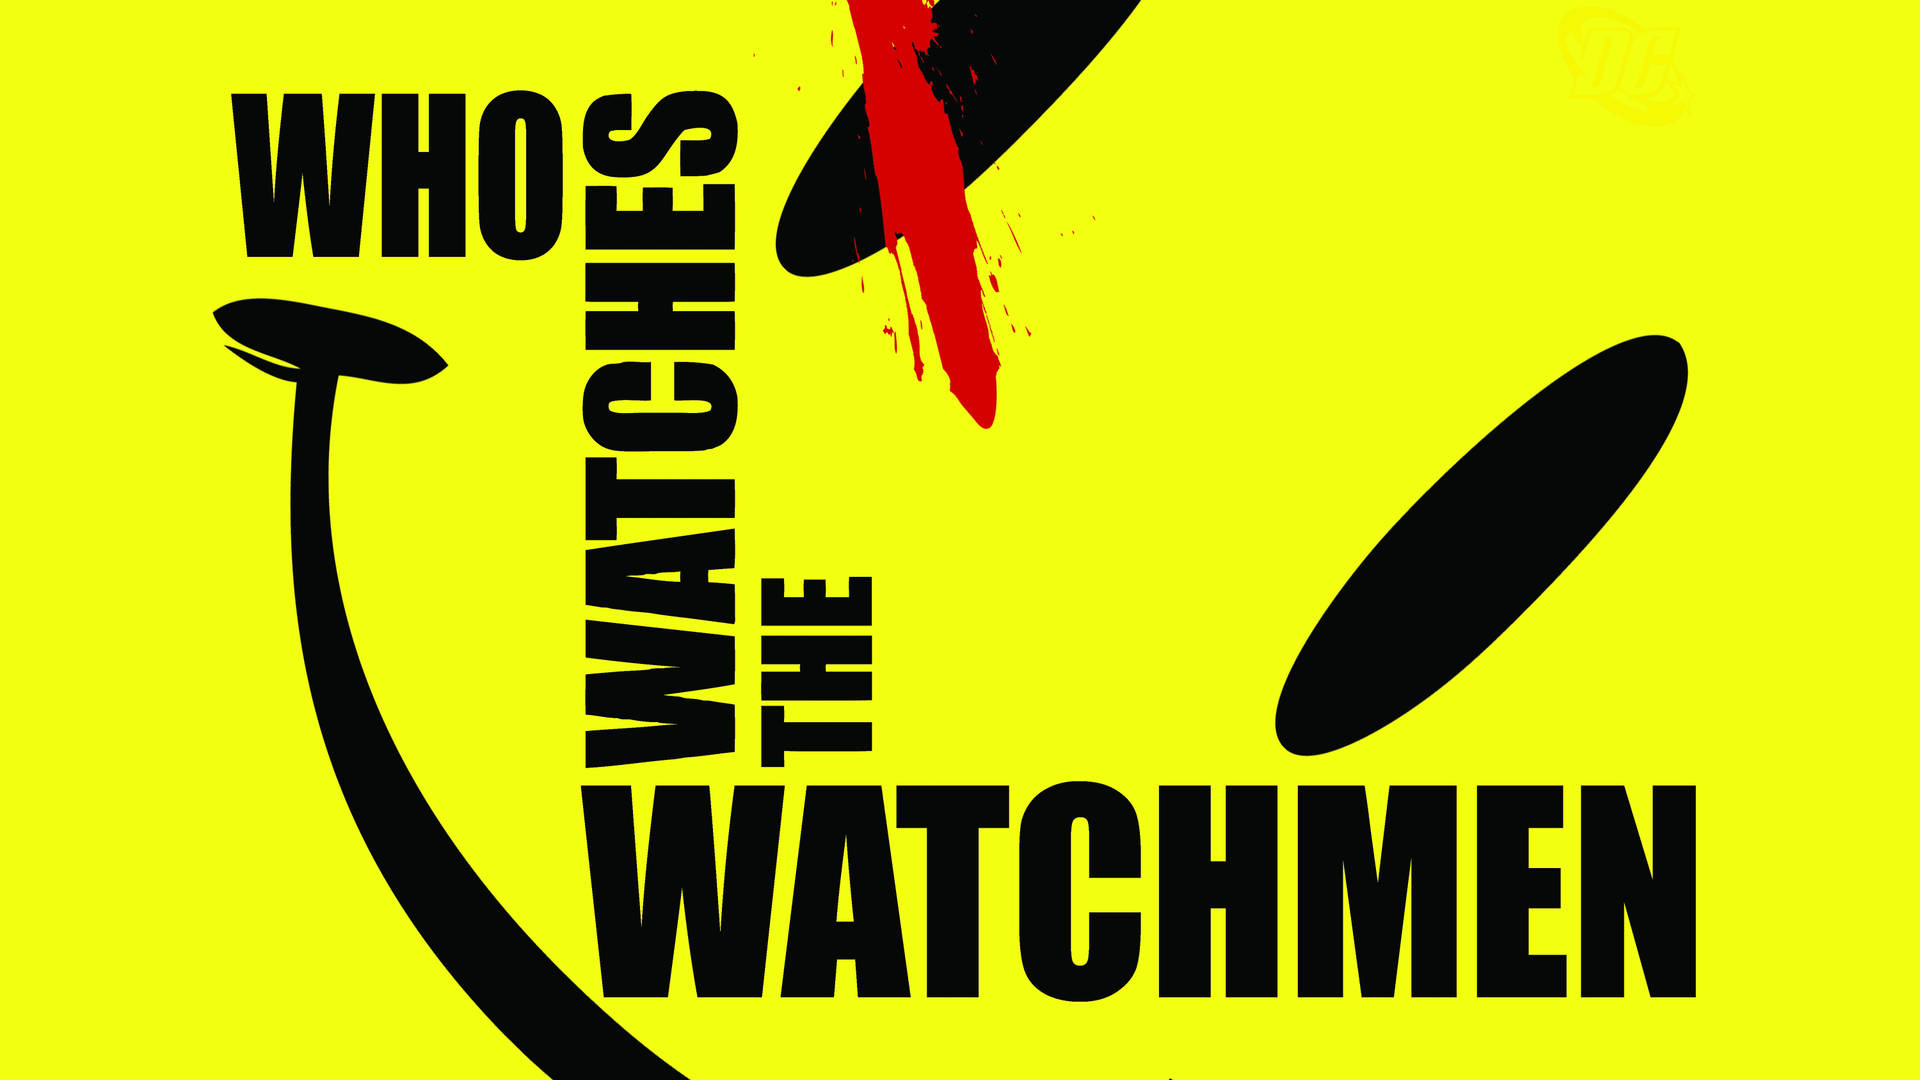 Who Watches The Watchmen Wallpaper